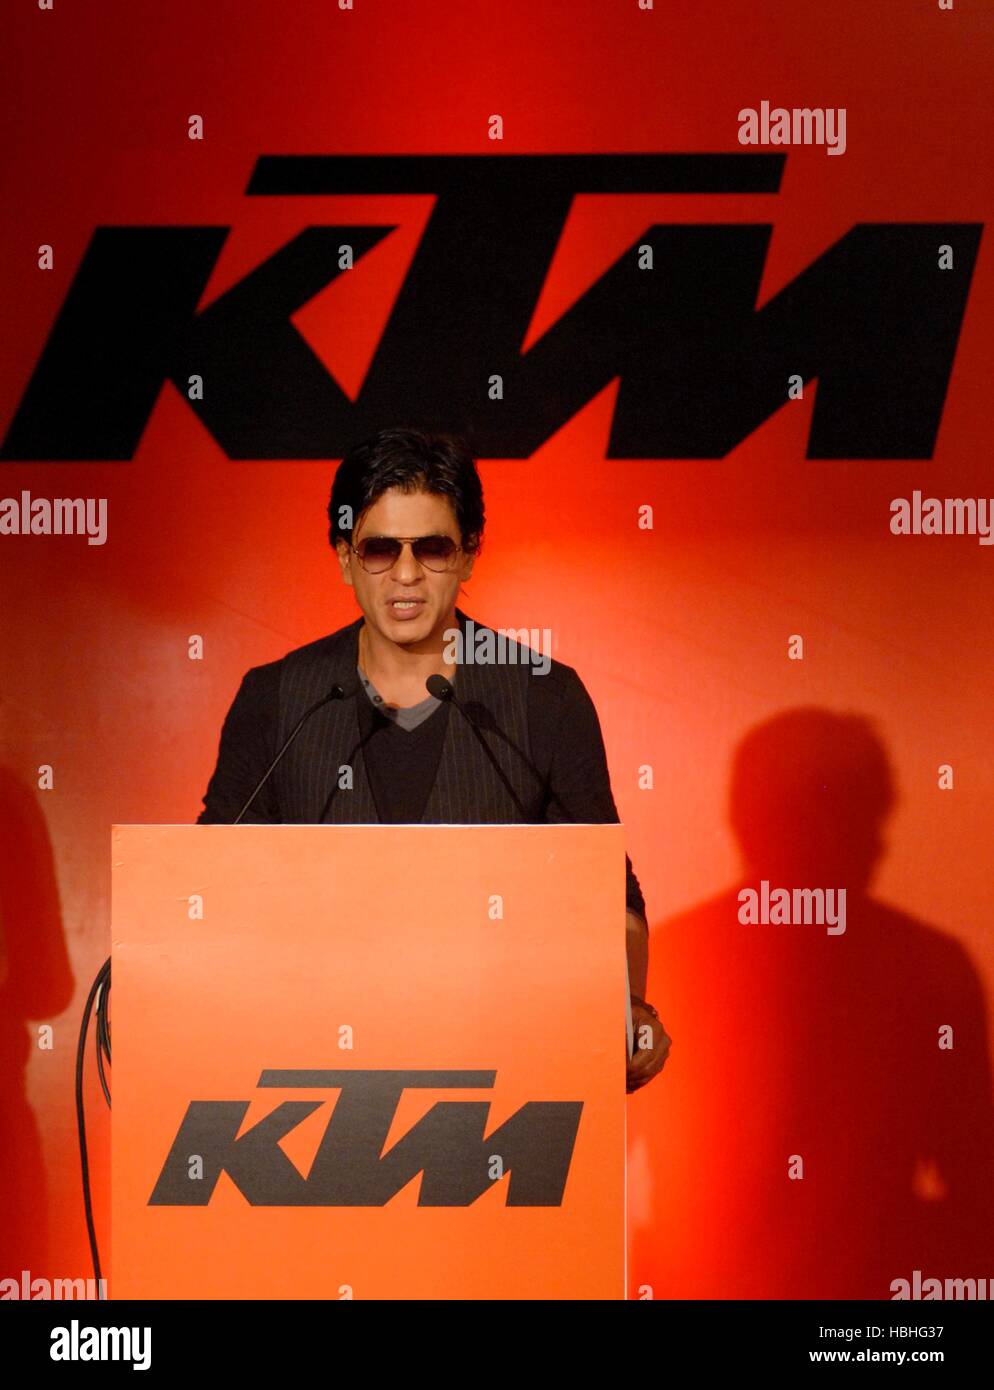 Shah Rukh Khan, Indian Bollywood actor speaking at meeting of KTM Motorcycles of Bajaj Auto in Pune India Stock Photo